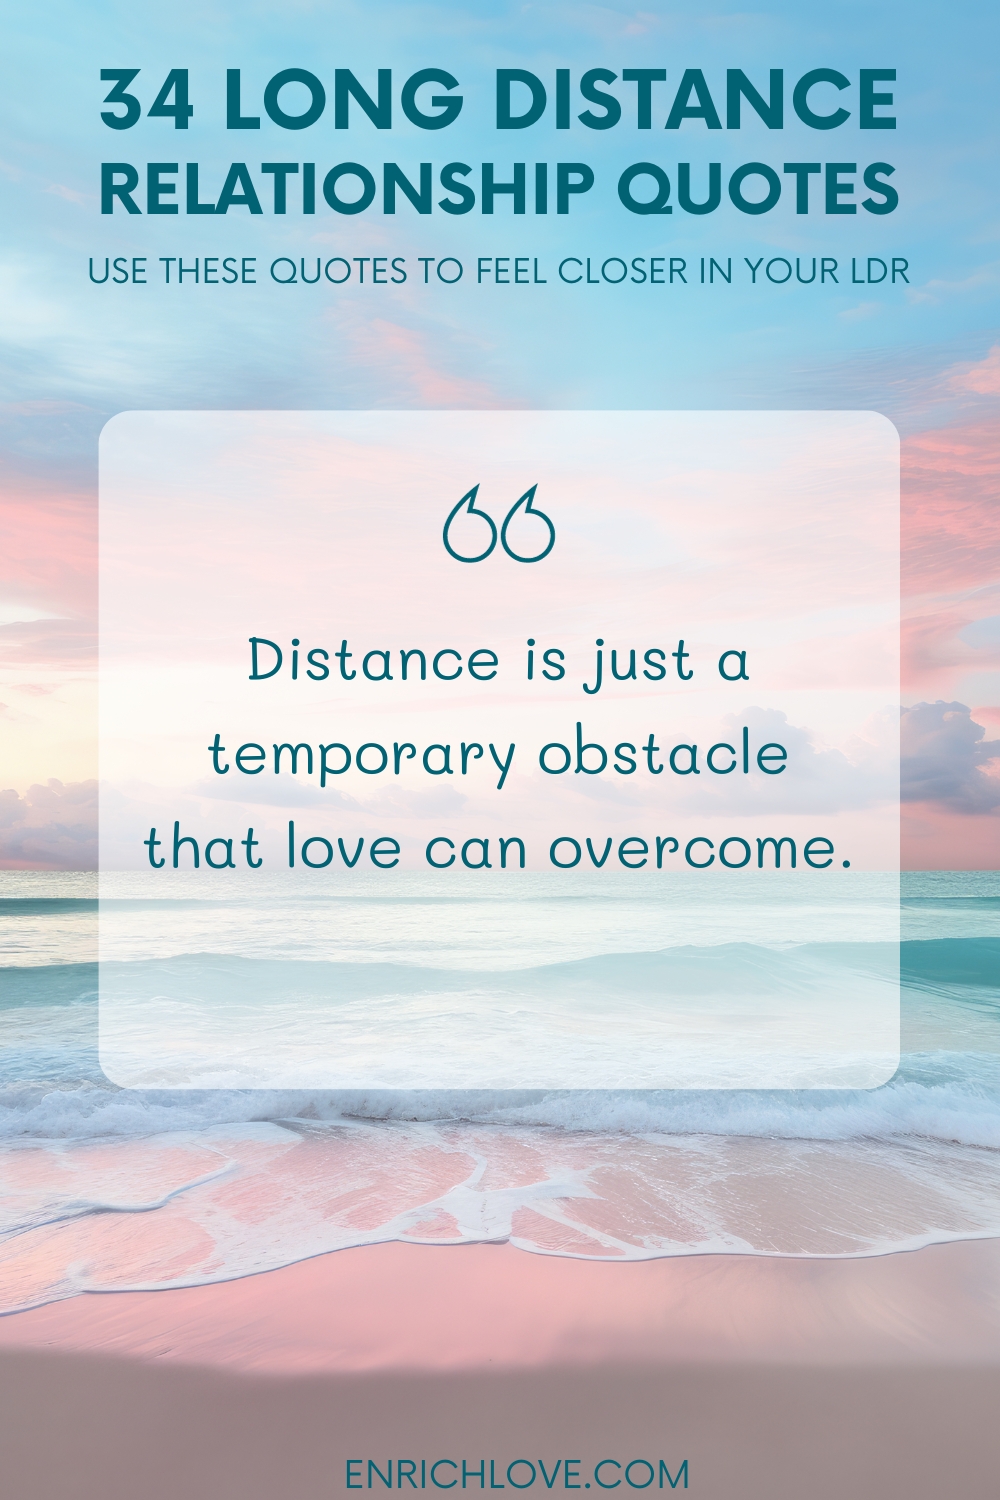 34 Long Distance Relationship Quotes - Distance is just a temporary obstacle that love can overcome.